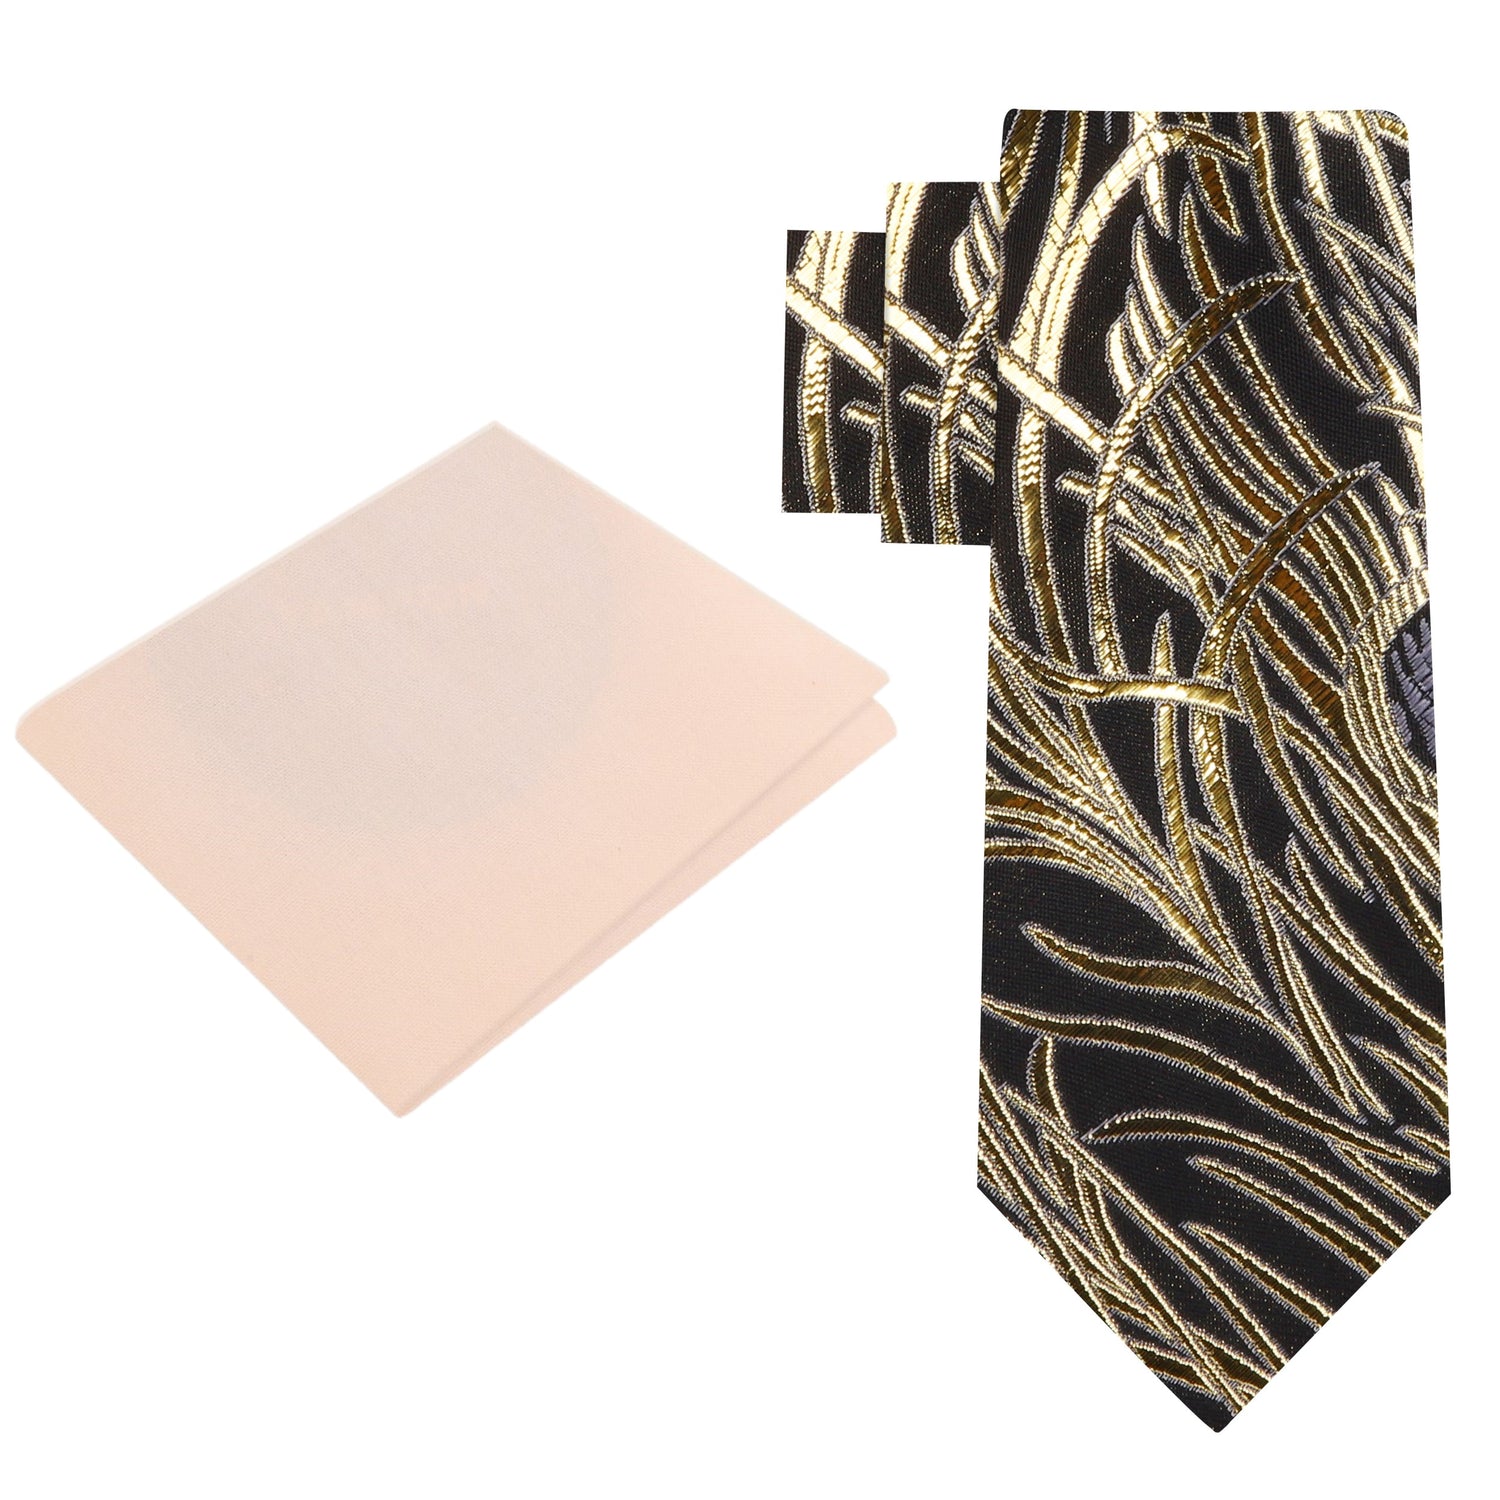 Alt View: Black, Gold, Grey Abstract Silk Necktie with Cream Square